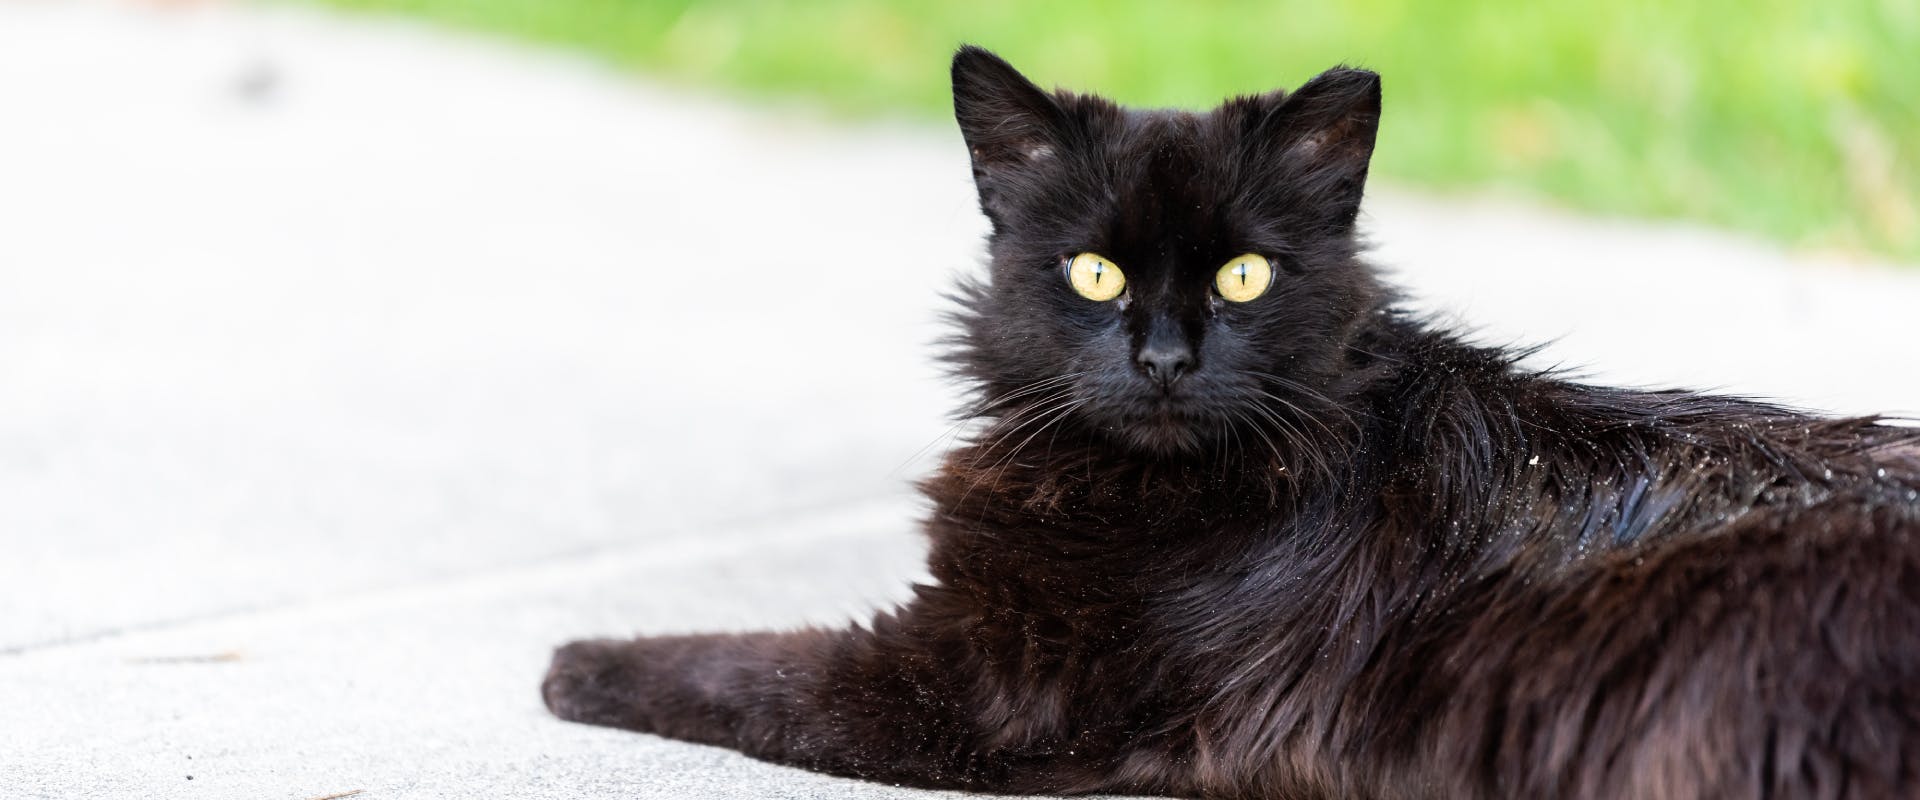 a long-haired black cat with yellow eyes lying on a concrete sidewalk with flecks of cat dandruff on its fur